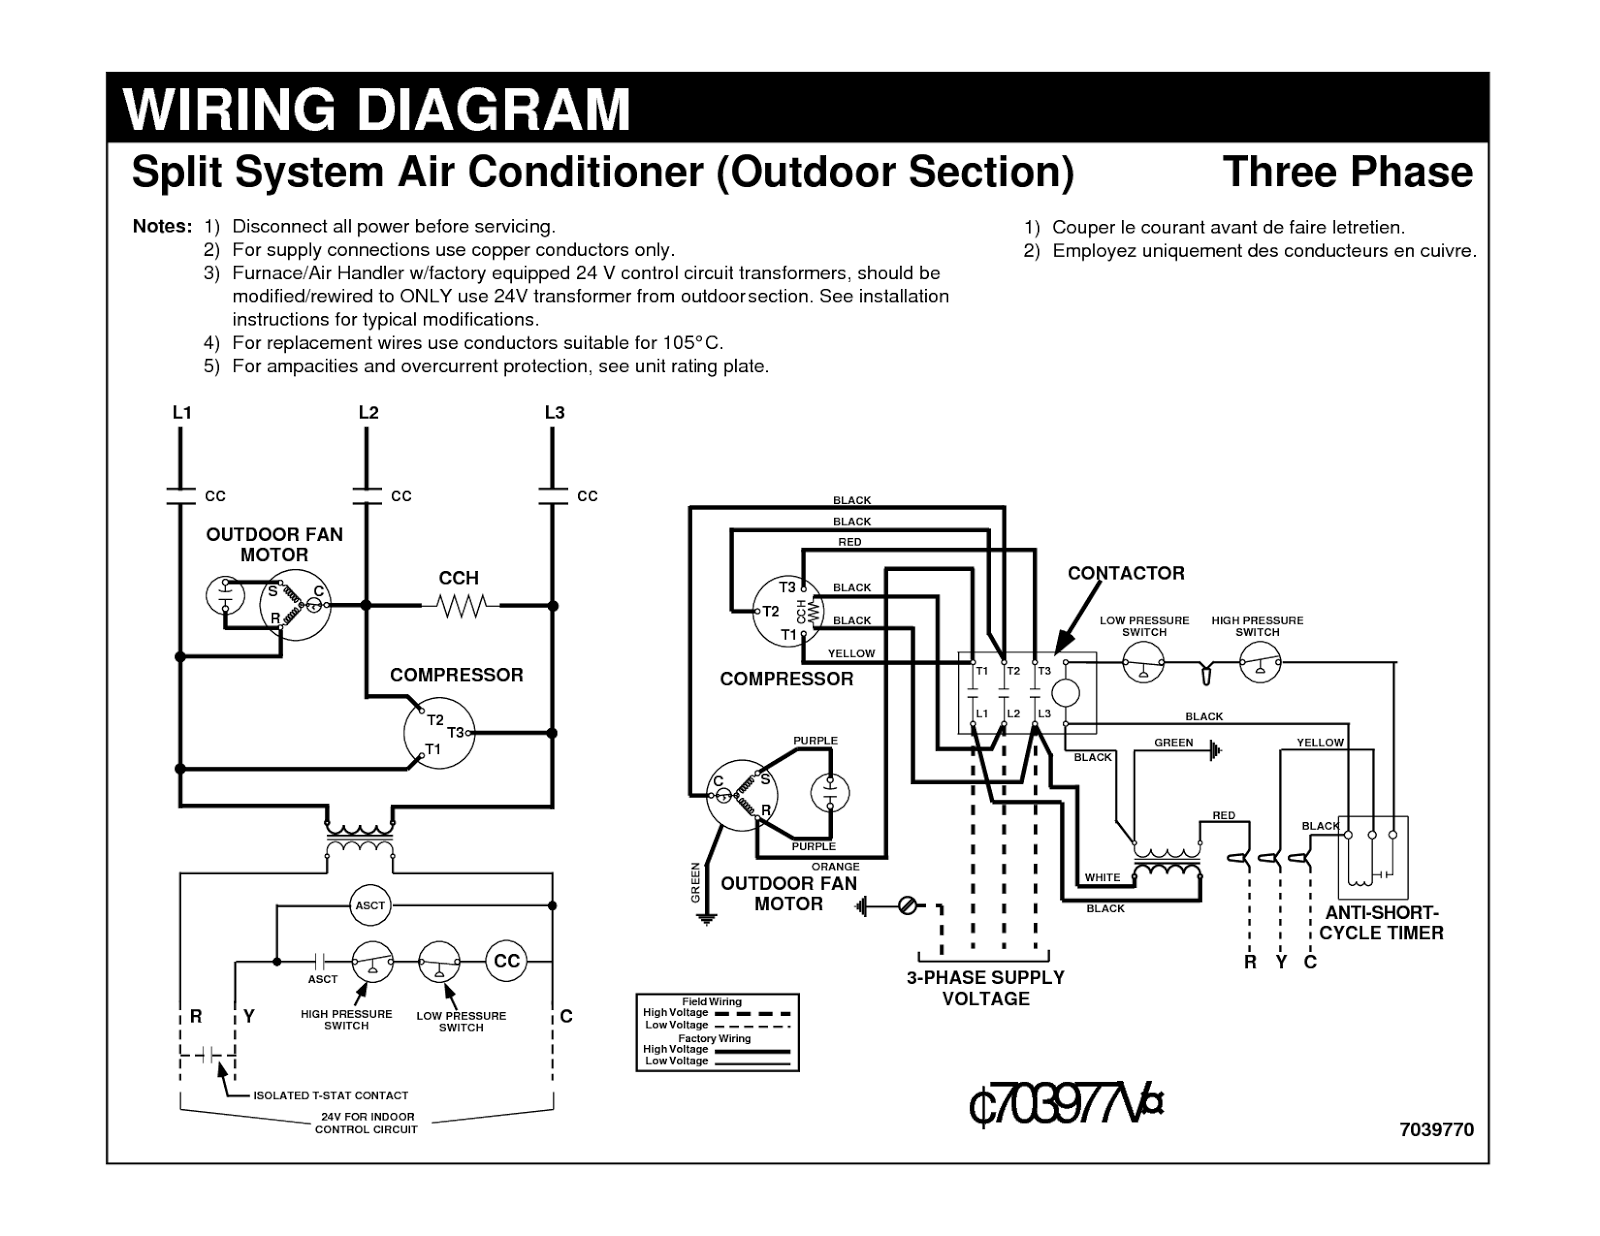 Electrical Wiring Diagrams for Air Conditioning Systems - Part One ~ Electrical Knowhow